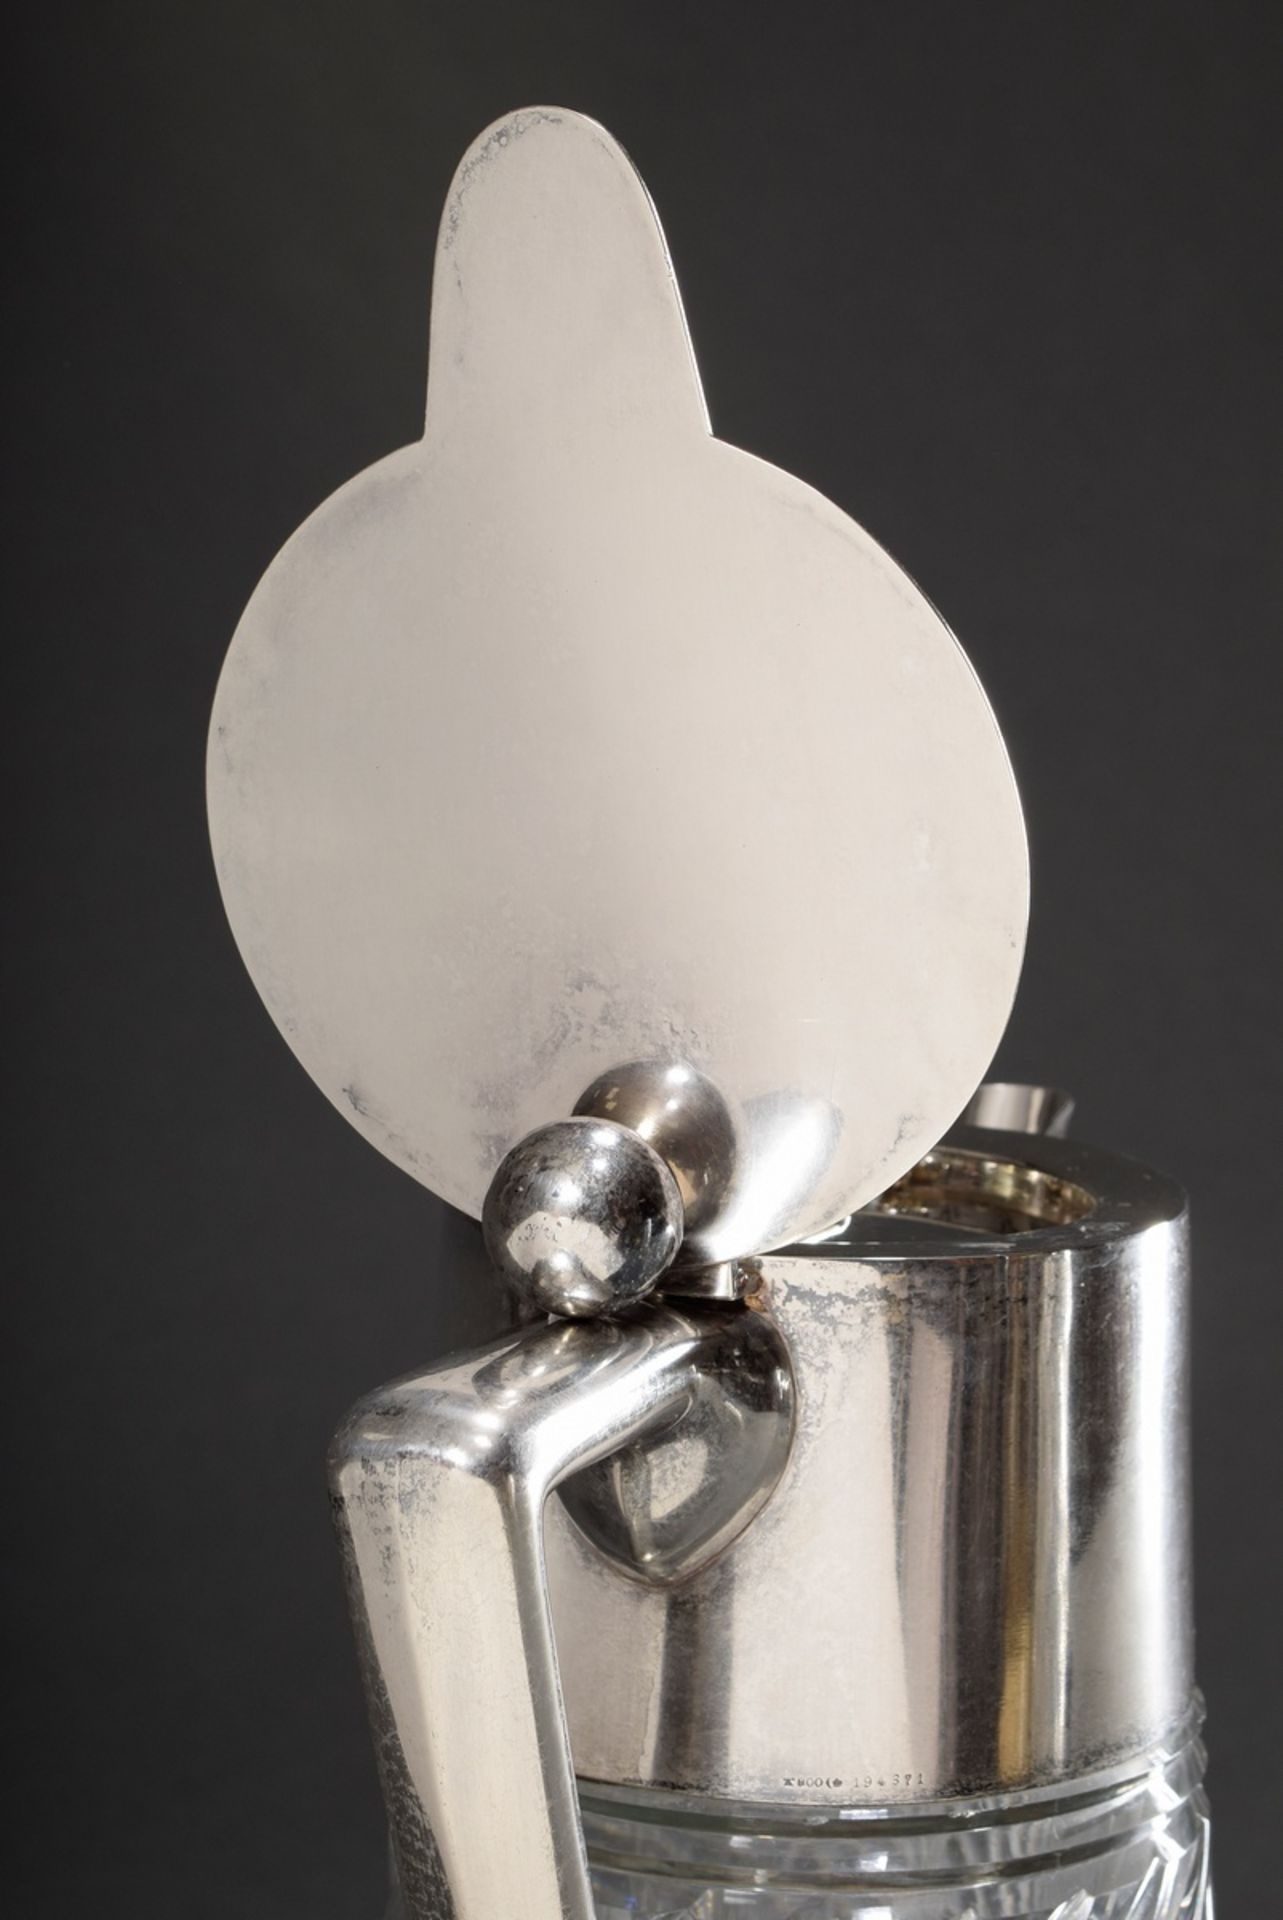 Large crystal juice jug "Kalte Ente" (Cold Duck) with silver 800 mounting and grooved wall, Wilkens - Image 3 of 7